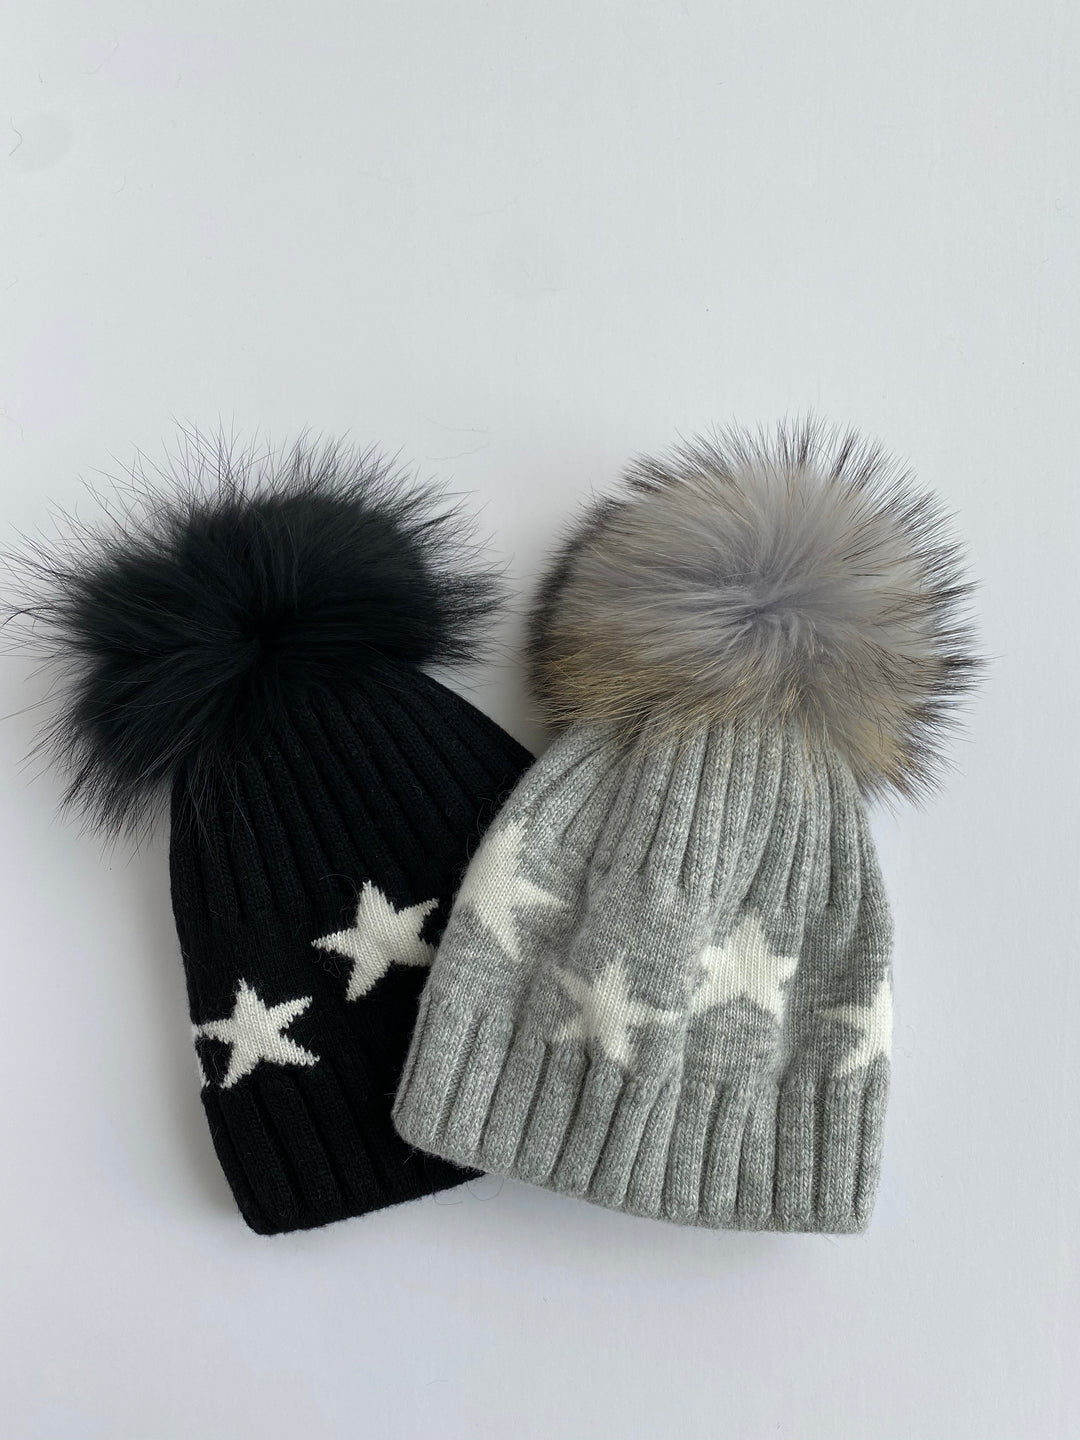 Equation Starry Hat in Black with white stars